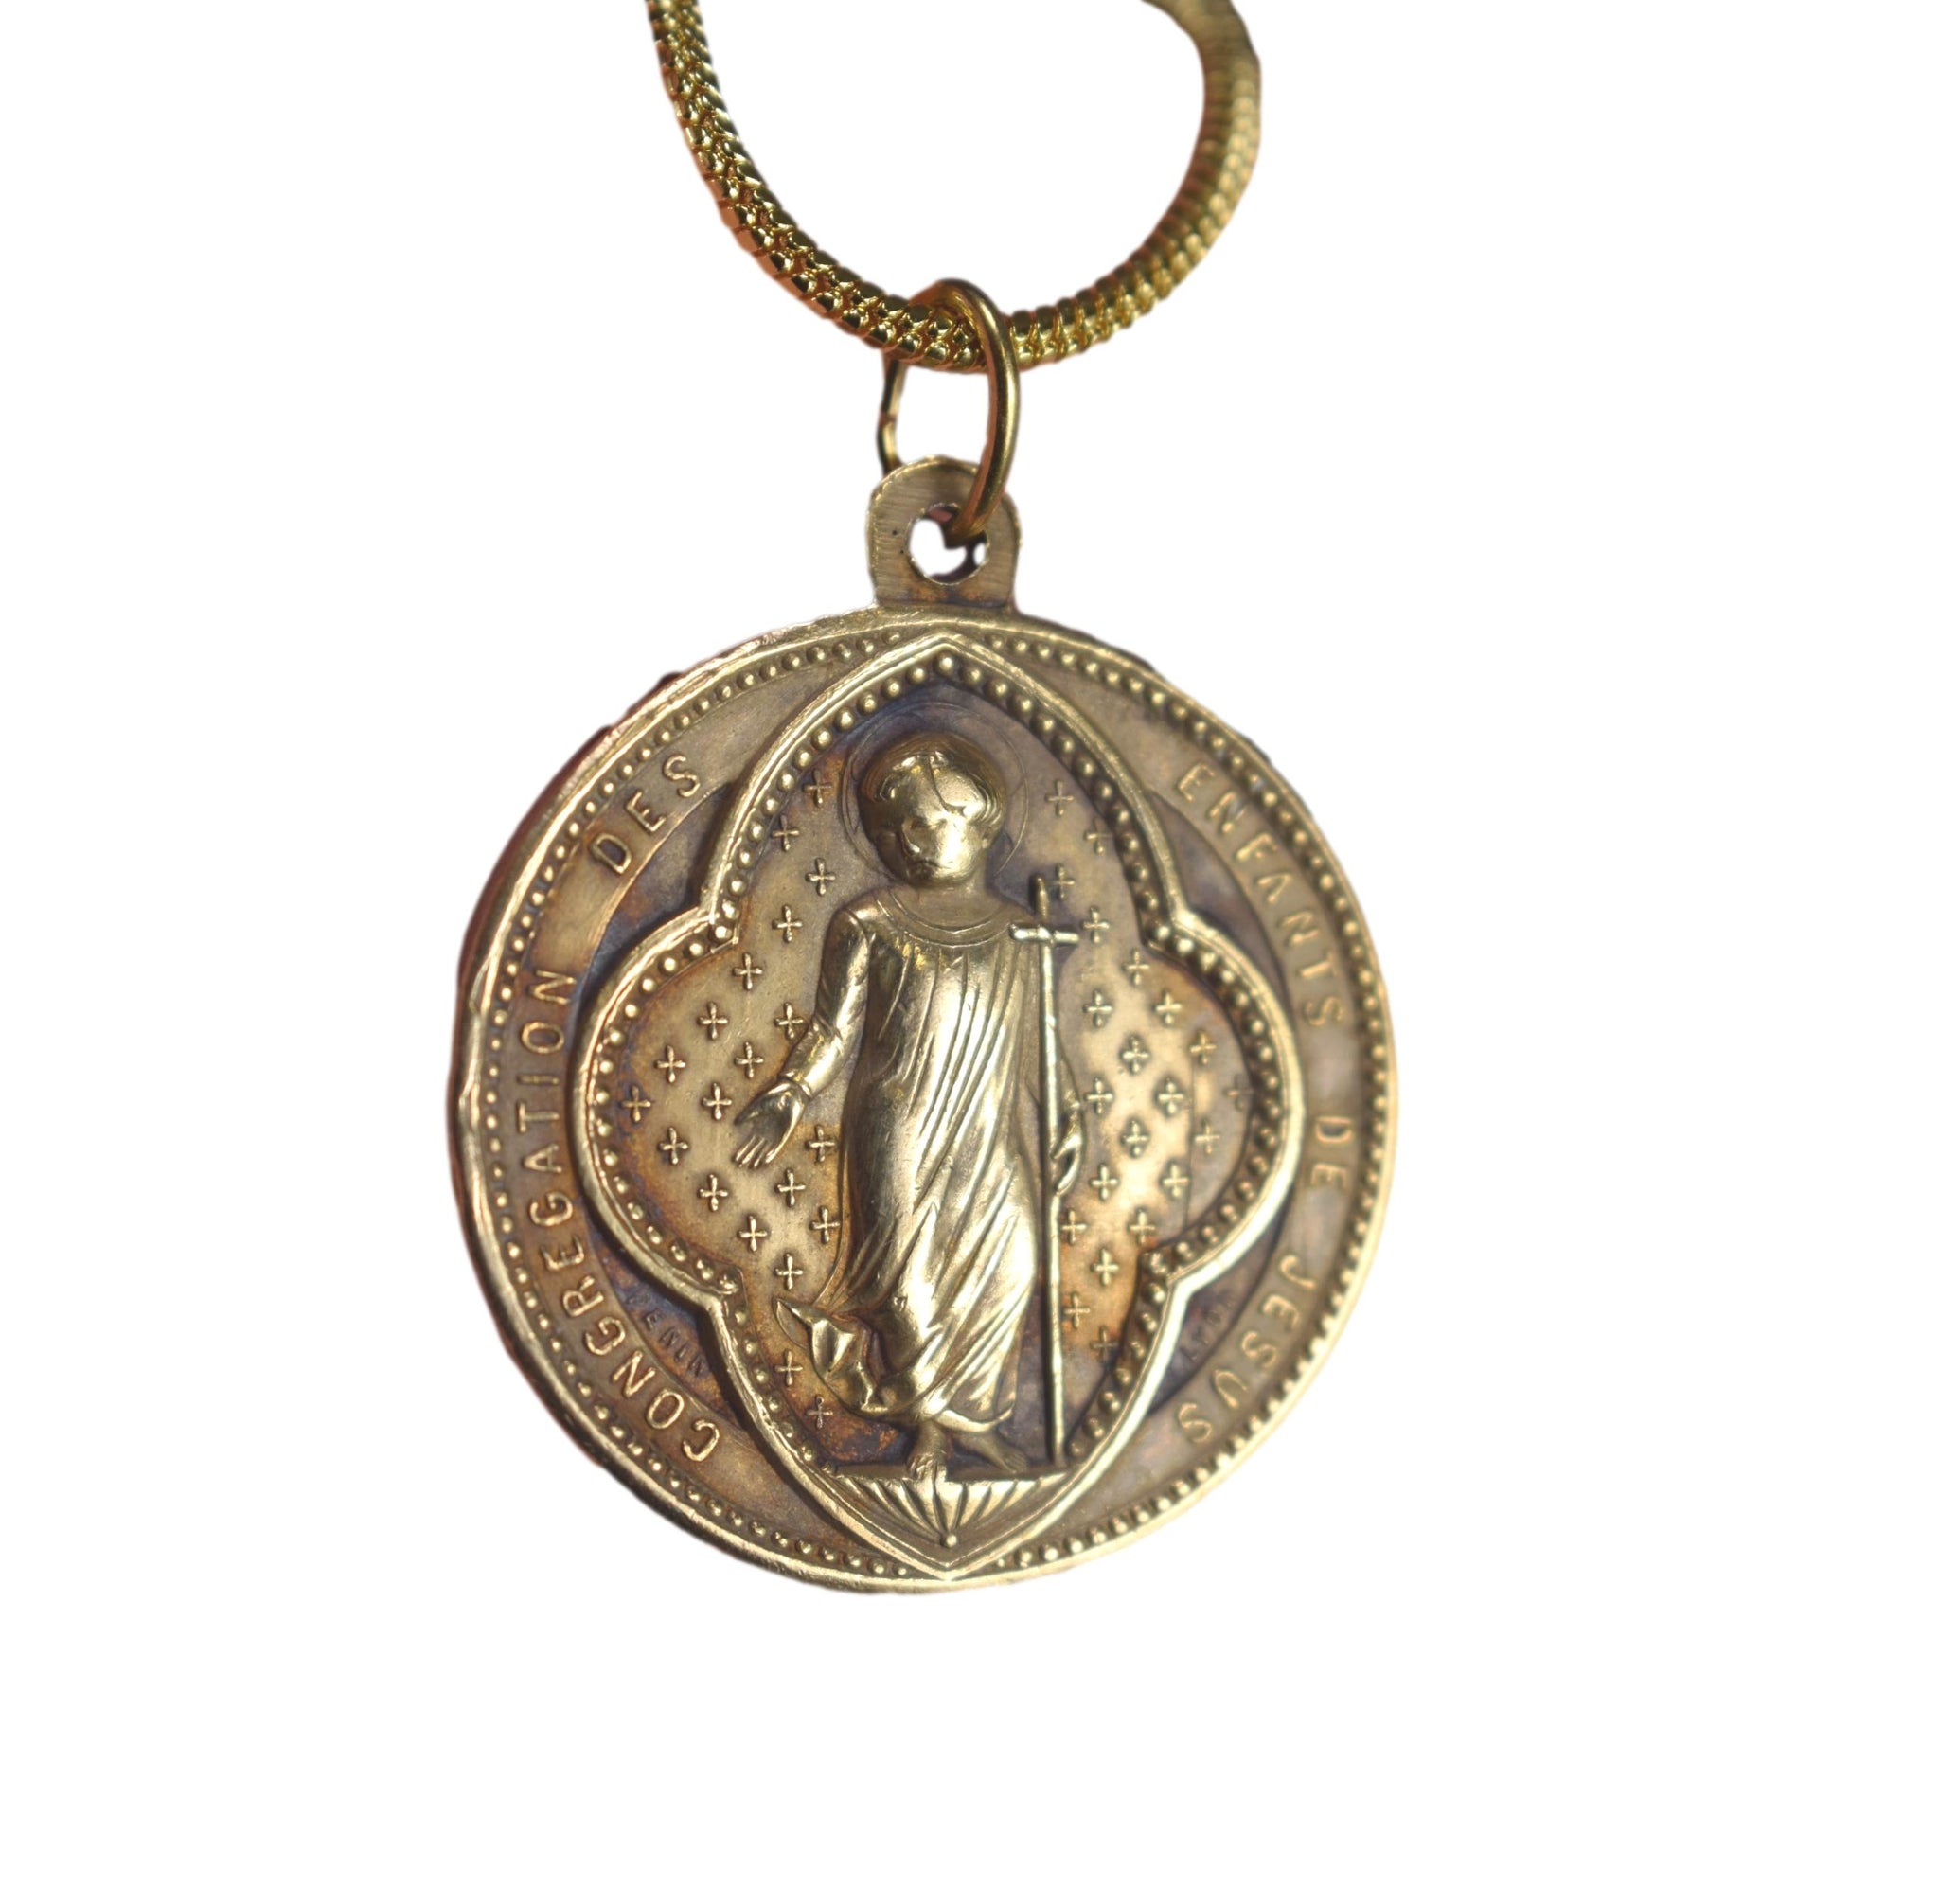 Alexander Castle Children's Small Solid 9ct Gold St Christopher Pendant  Medal - 14mm - PENDANT ONLY with Jewellery Gift Box : Amazon.co.uk: Fashion